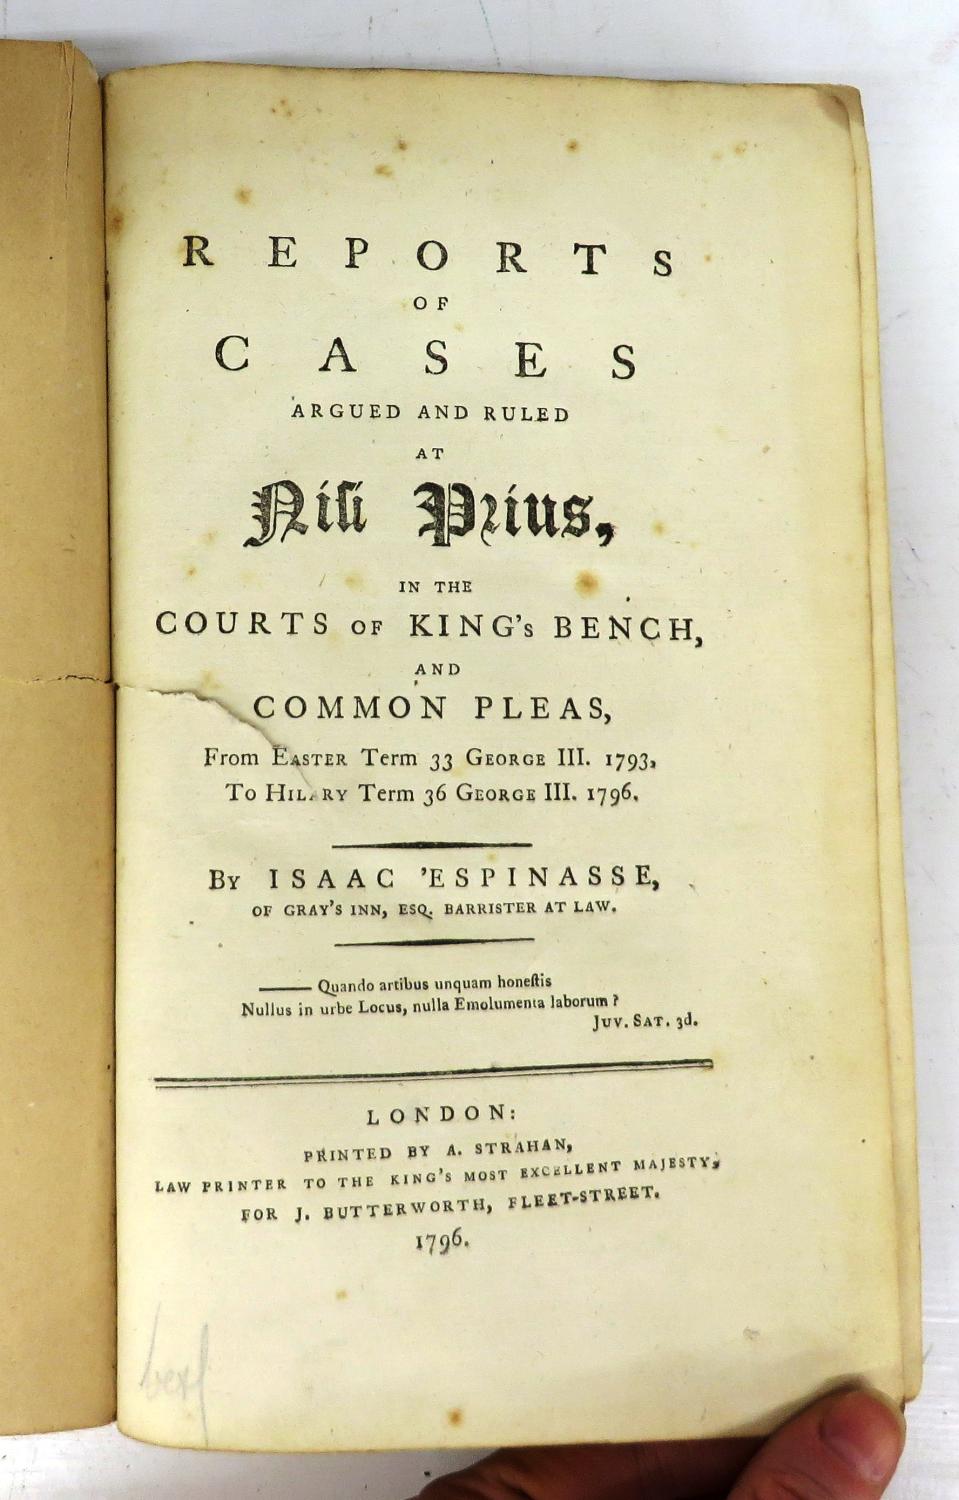 Reports of Cases Argued and Rules at Nisi Prius, In The Courts of King's Bench, and Common Pleas, From Easter Term 33 George III. 1793. to Hilary Term 36 George III. 1796 - ESPINASSE, Isaac